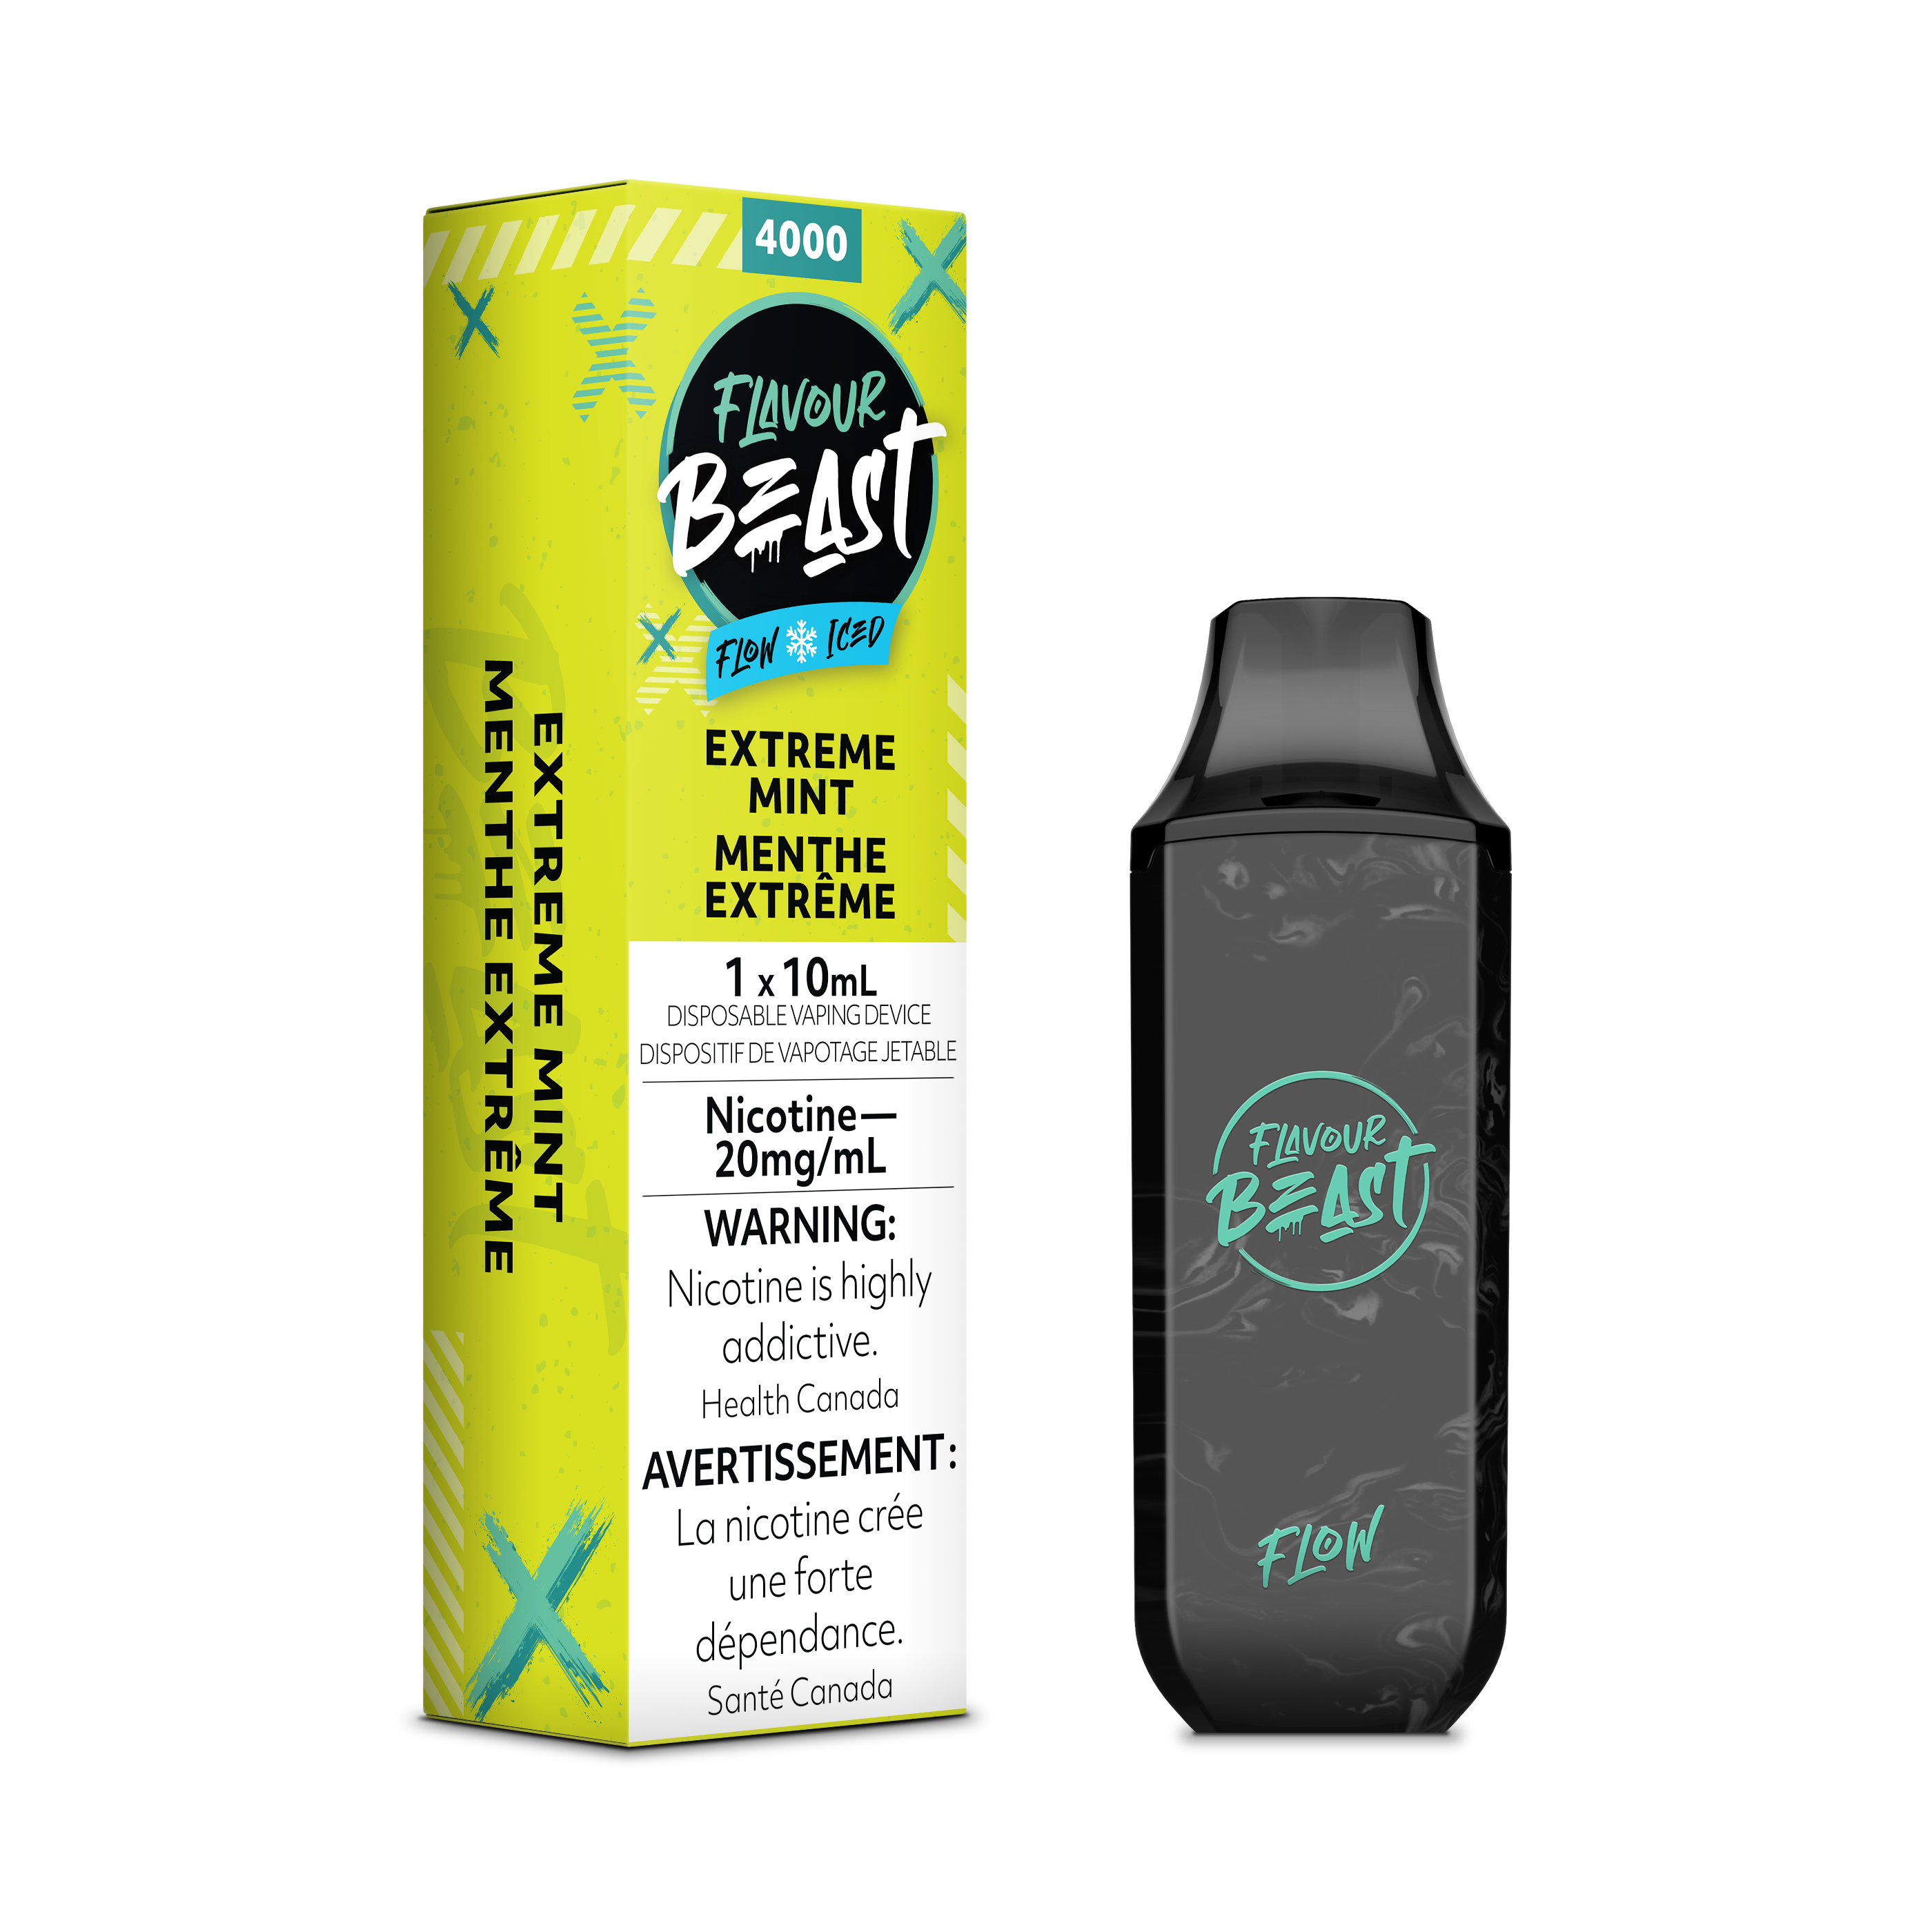 Extreme Mint - Flavour Beast Flow 4000 - EXCISED